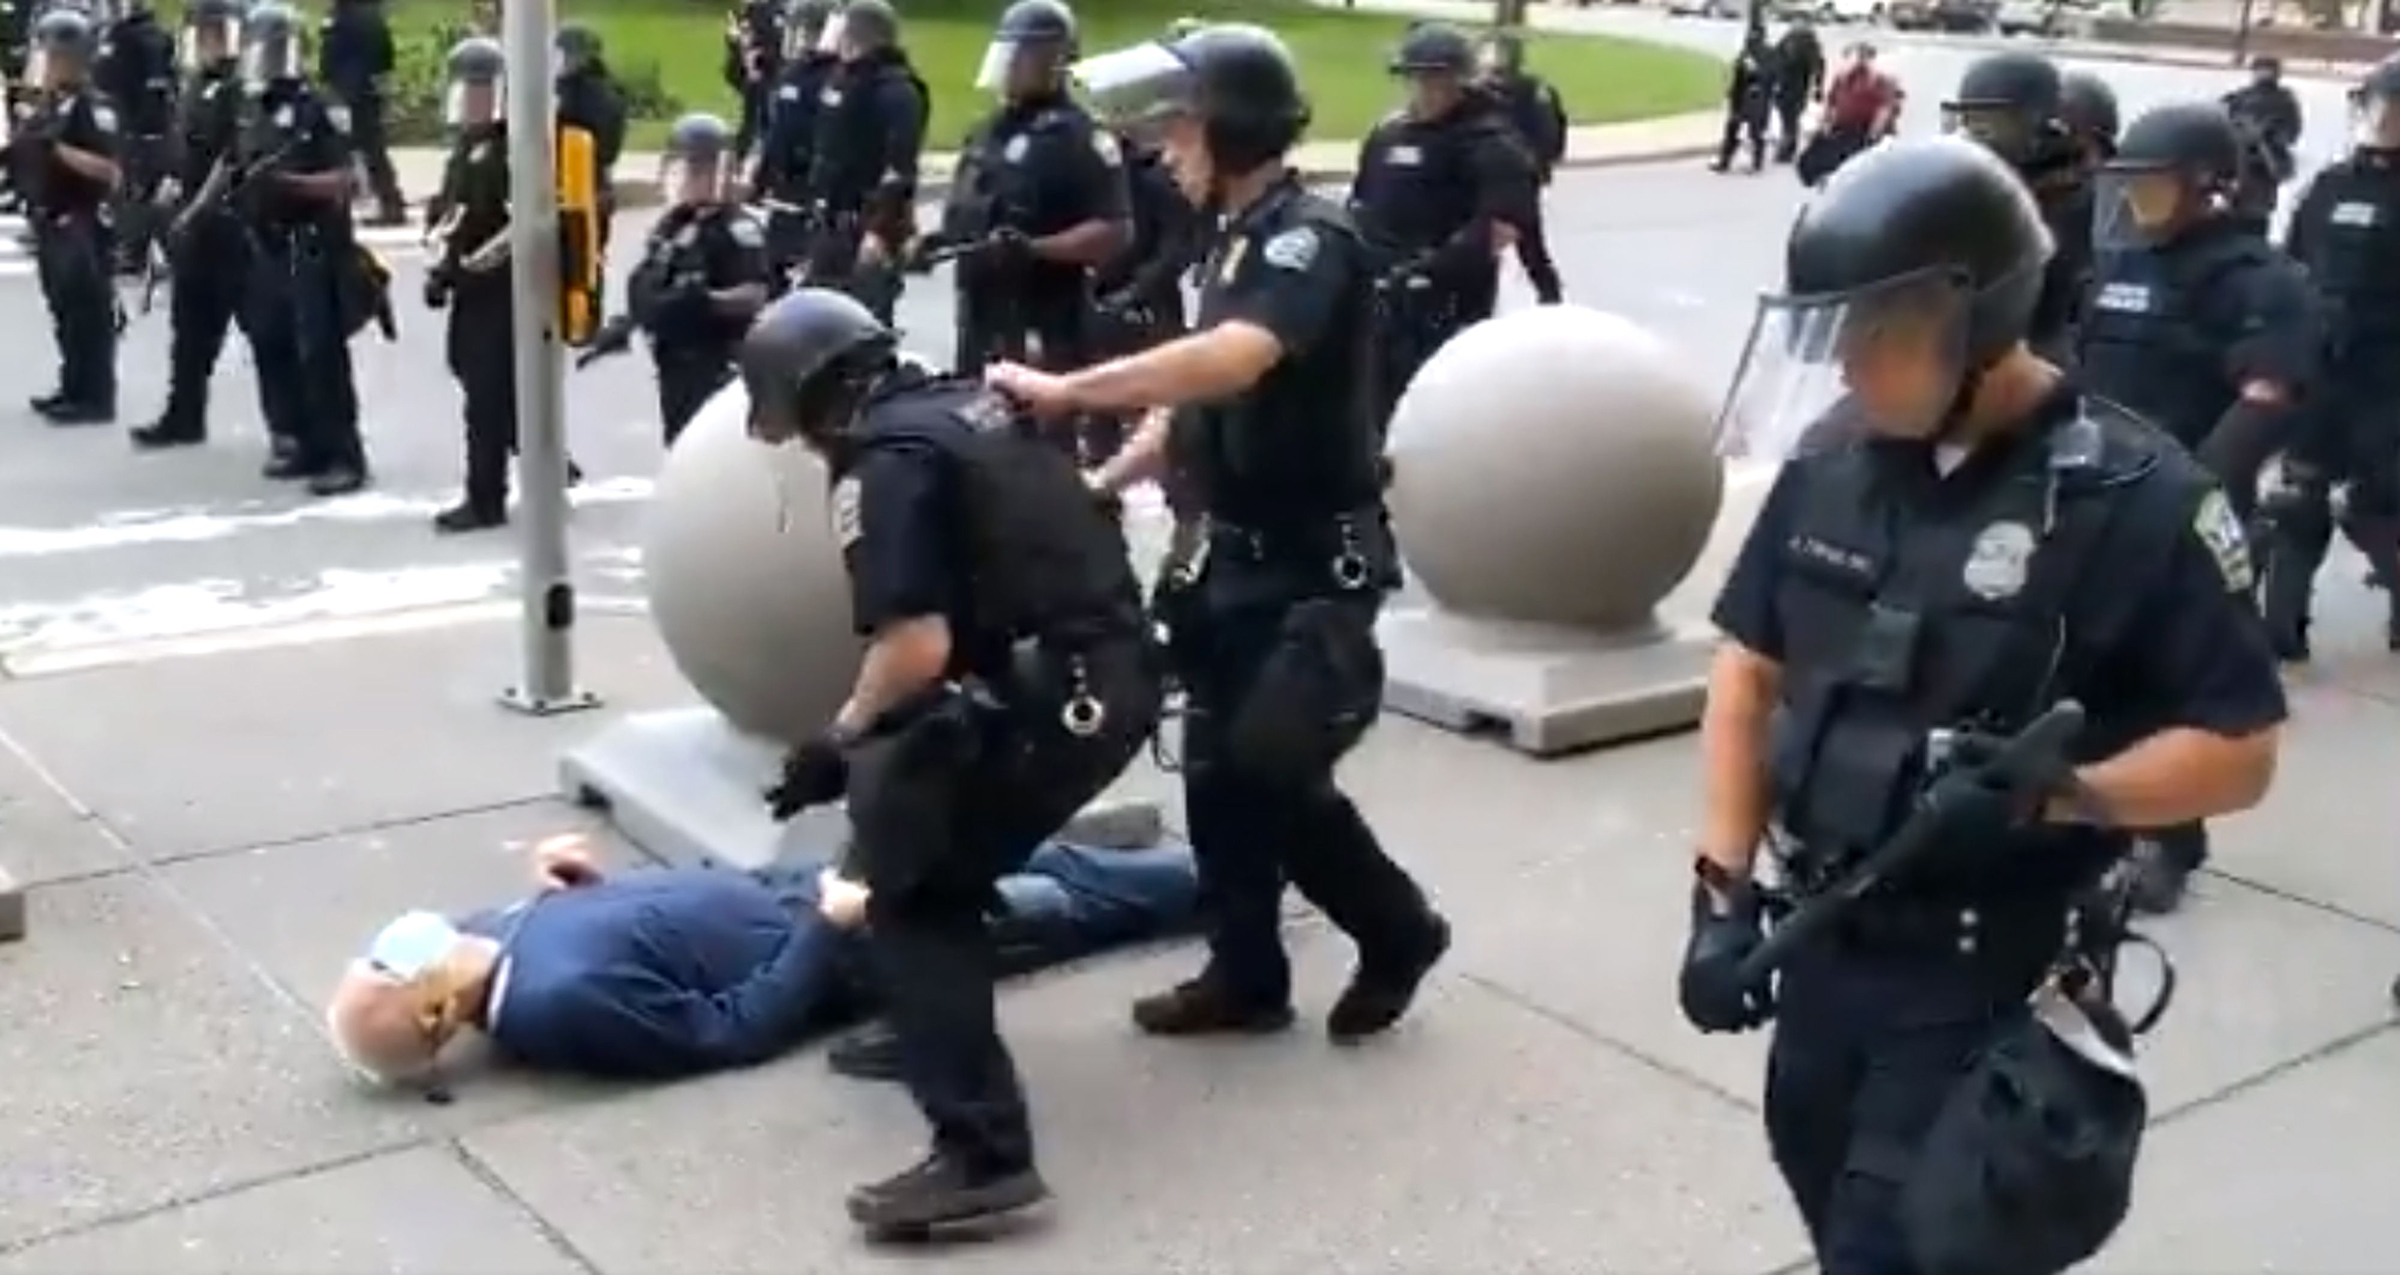 Martin Gugino was shoved by police officers in Buffalo, N.Y., on June 4. (Mike Desmond—WBFO NPR/AFP/Getty Images)